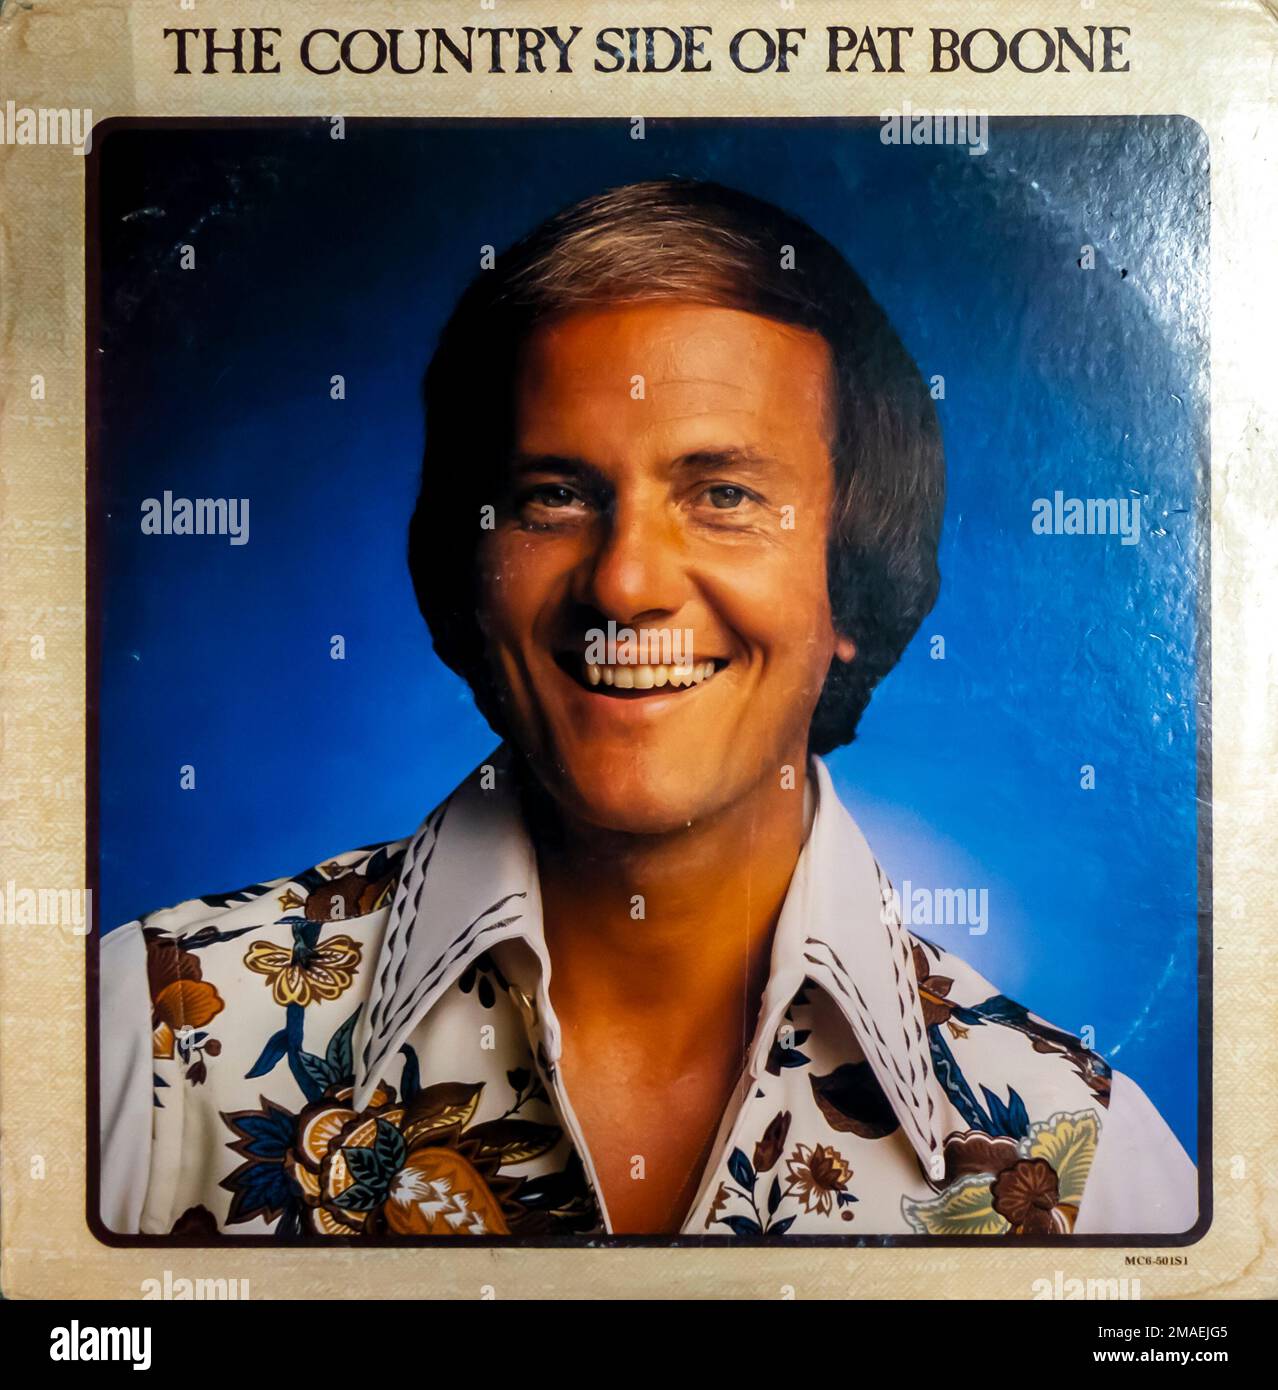 Pat Boone – The Country Side of Pat Boone - 1977 - Produttore – Ray Ruff © 1977 Motown Record Corporation, copertina in vinile Foto Stock